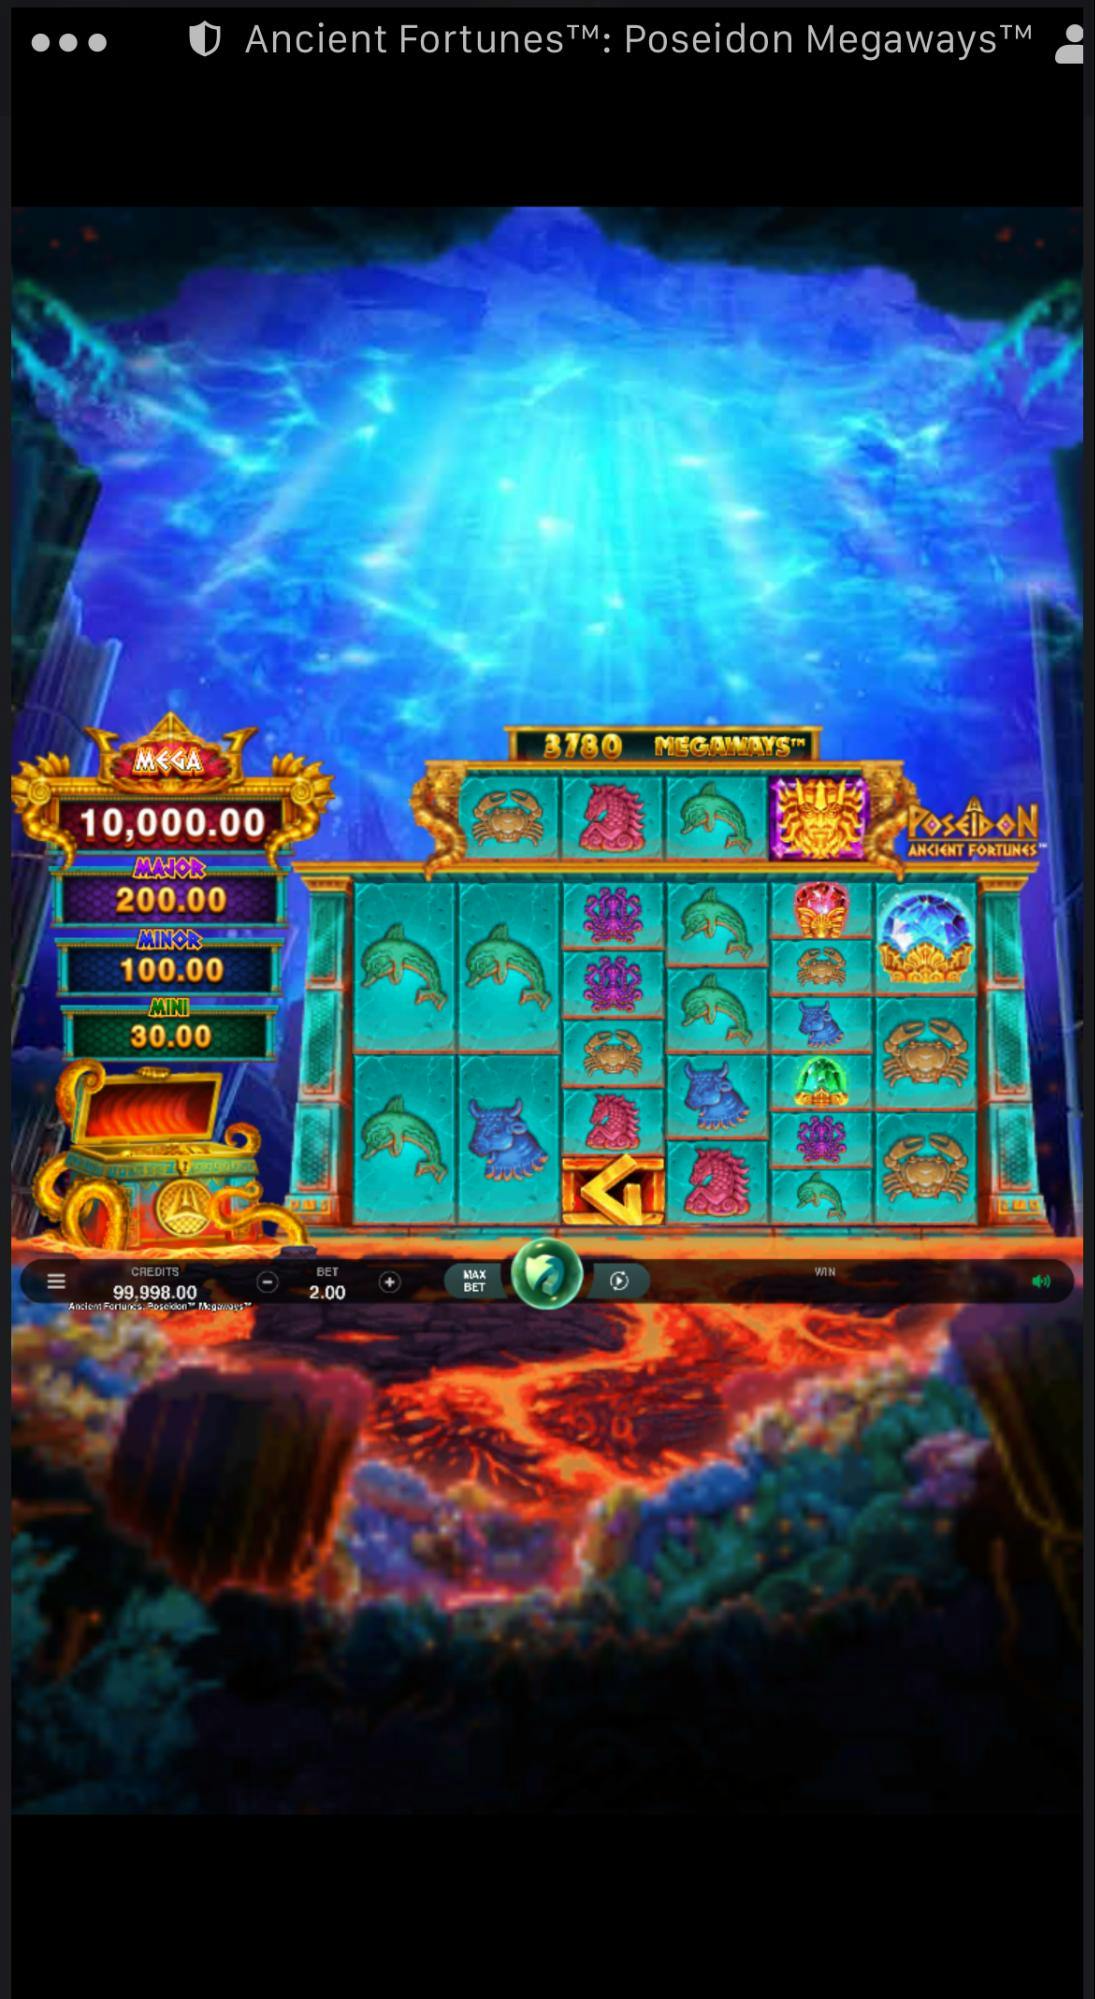 jackpot slot testing betvictor: ancient fortunes